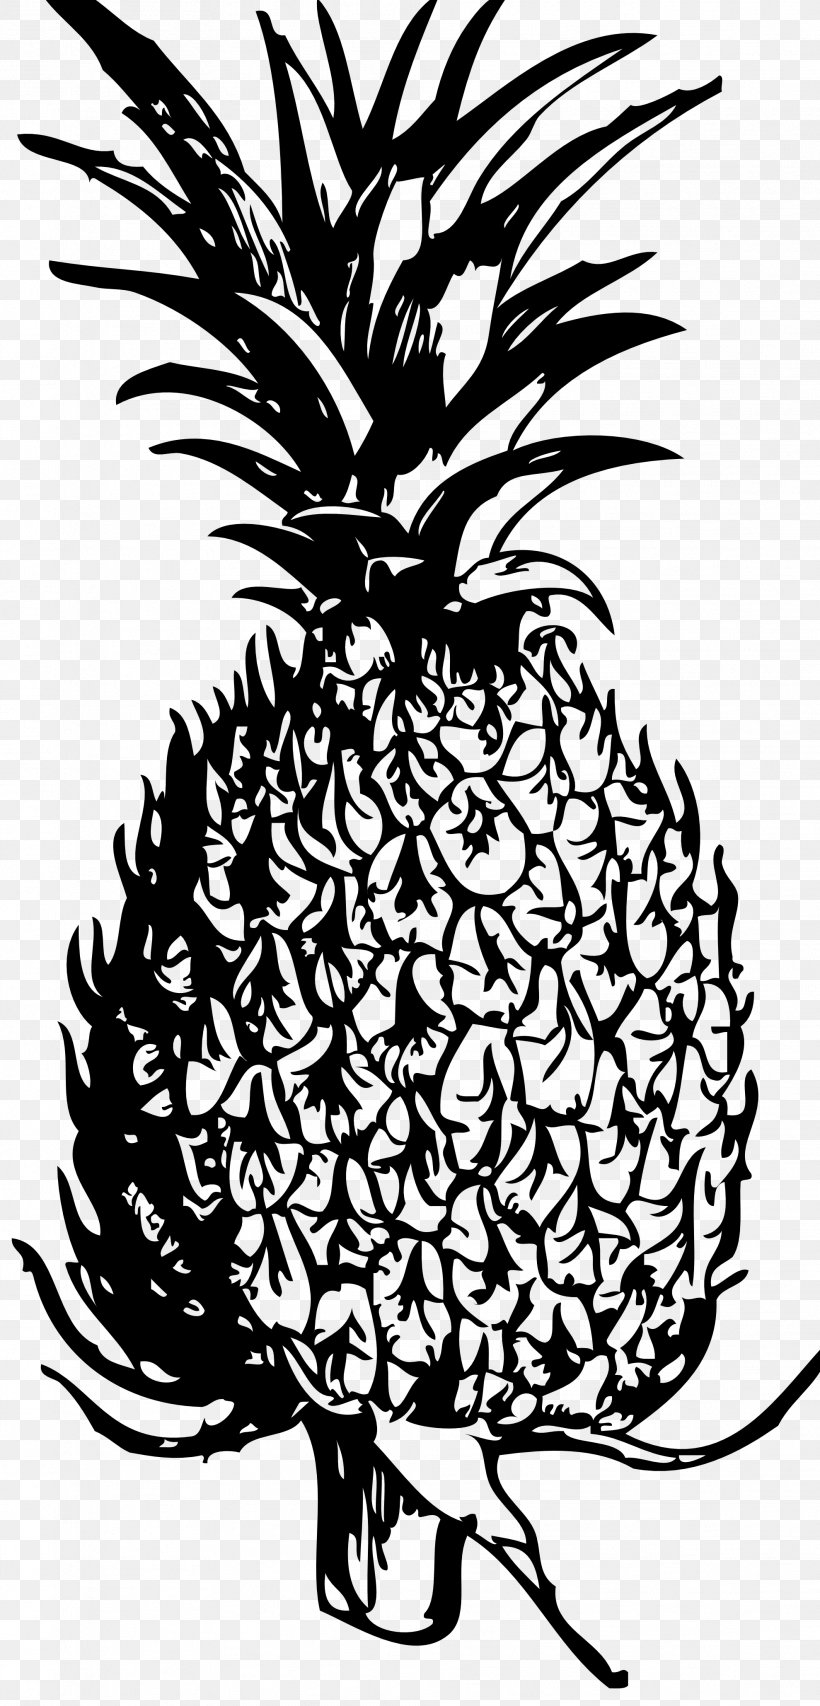 Pineapple Blog Black And White Clip Art, PNG, 1979x4118px, Pineapple, Arecales, Artwork, Black, Black And White Download Free